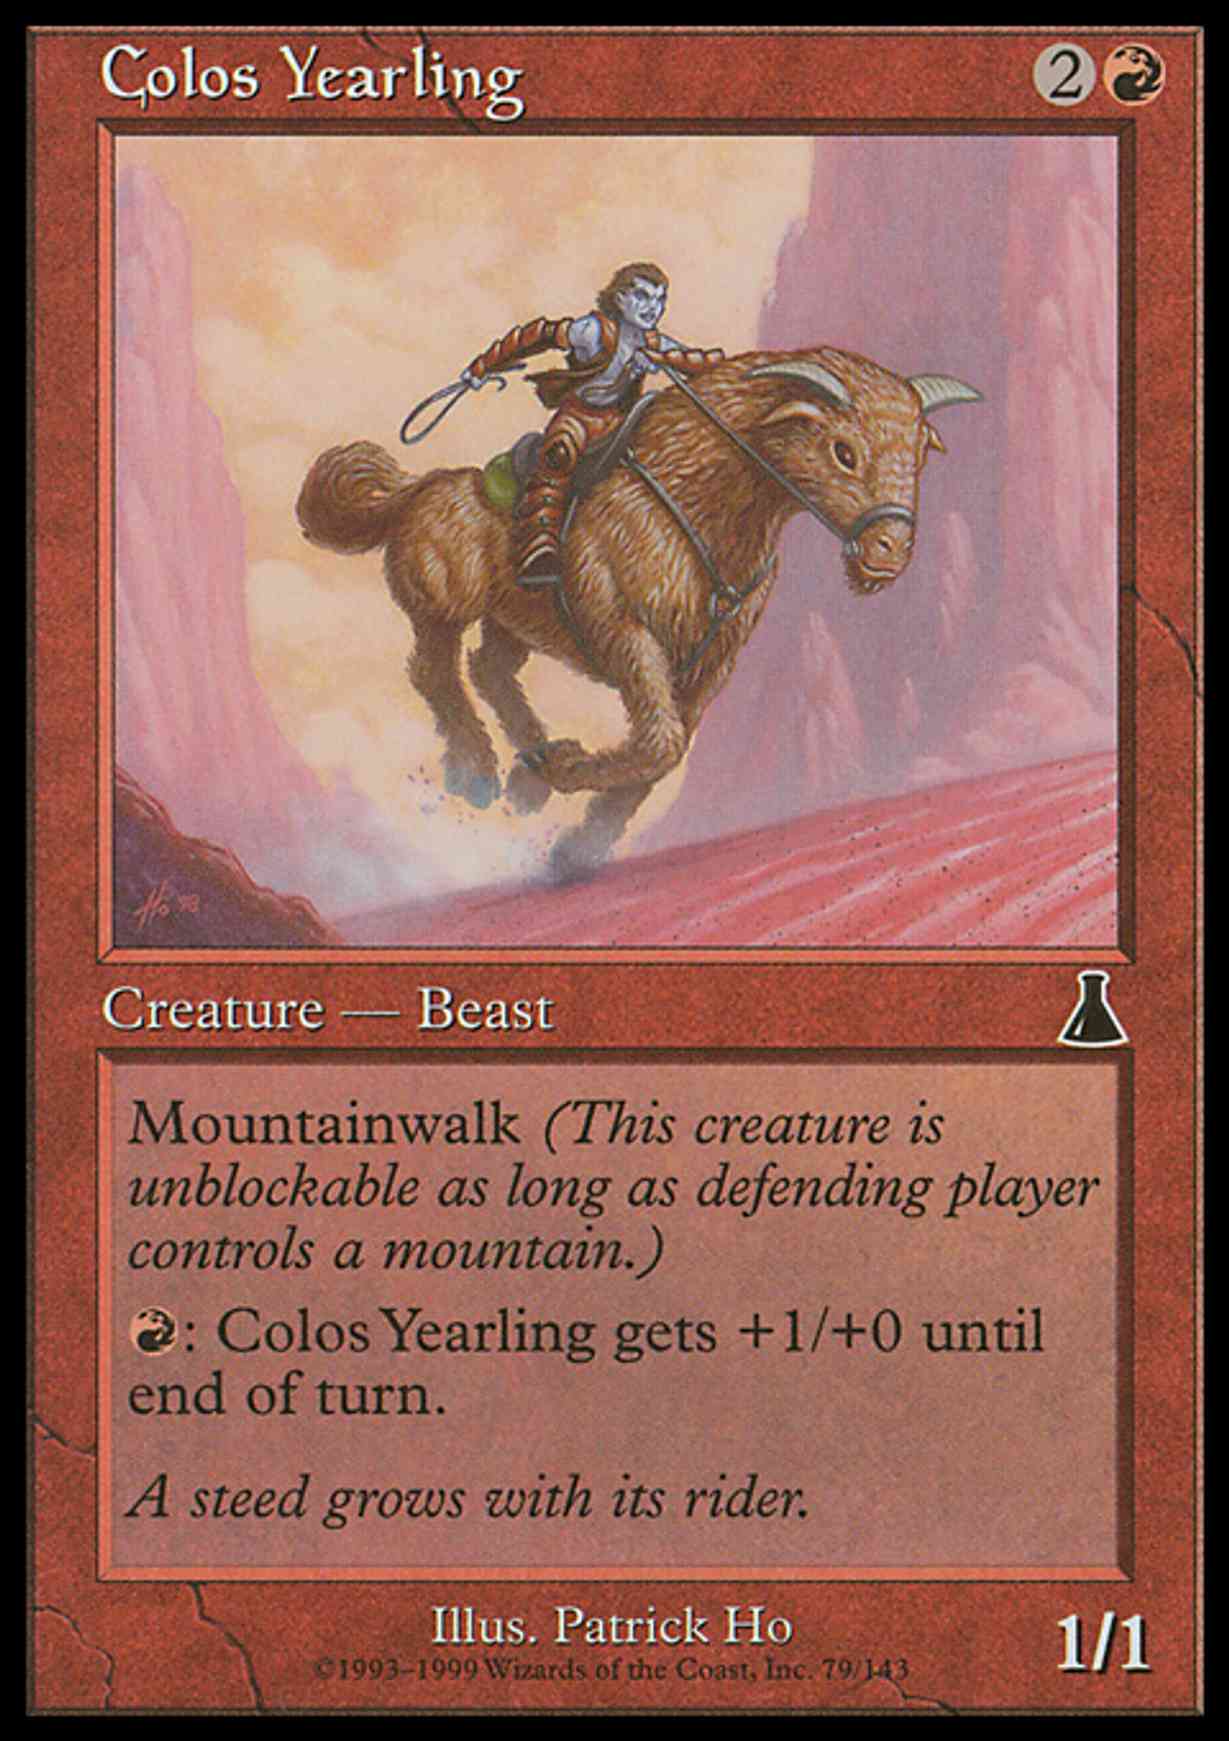 Colos Yearling magic card front